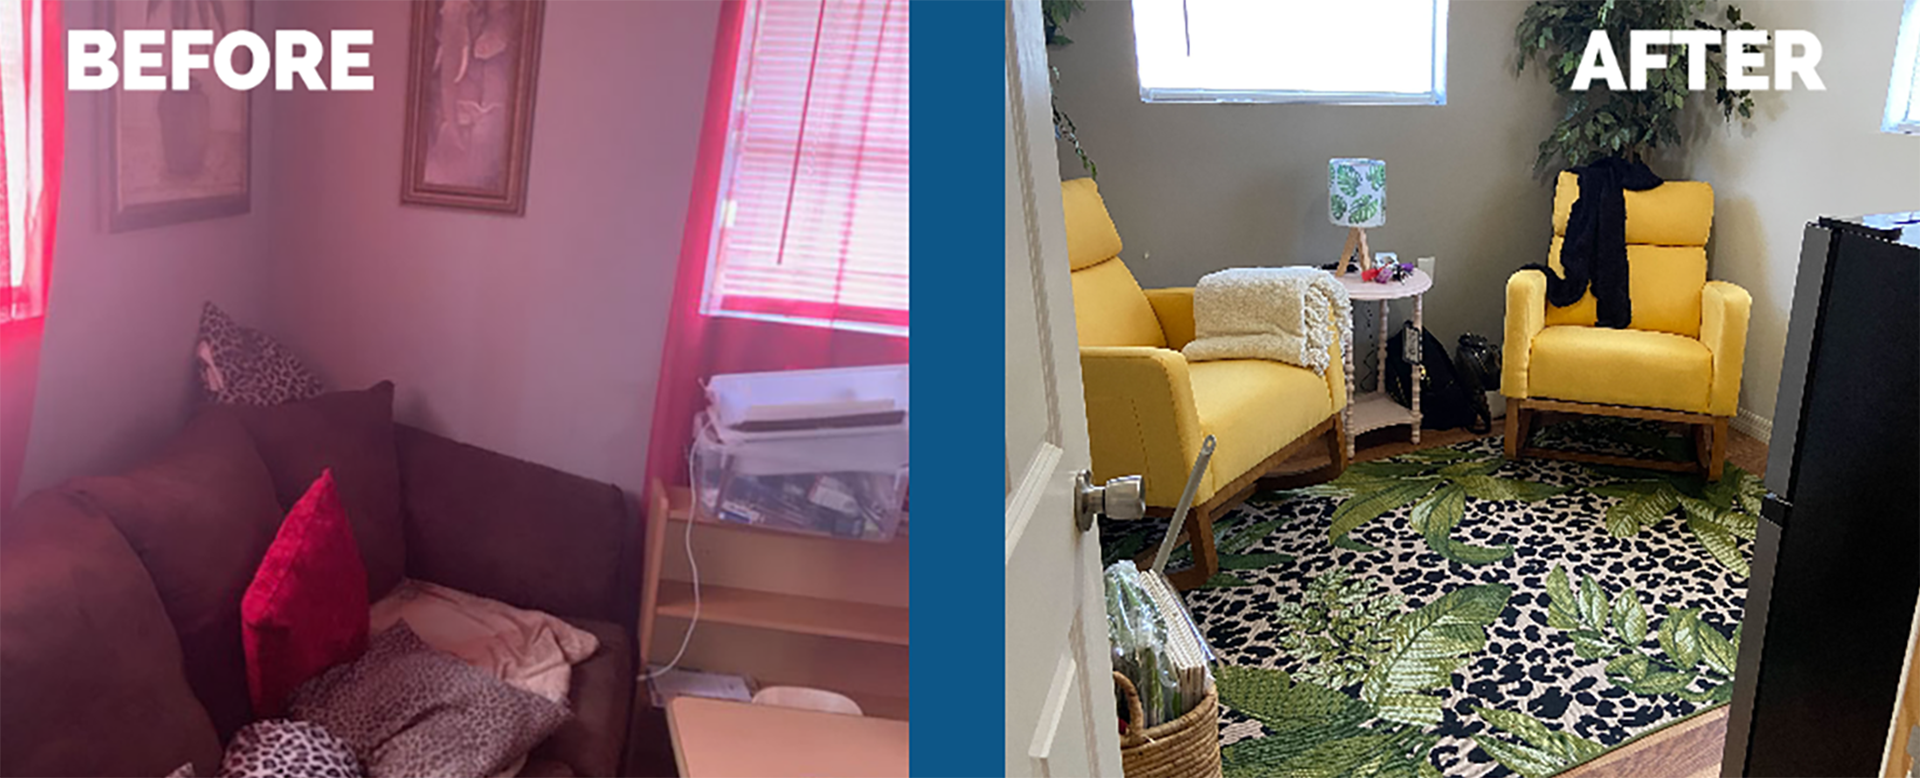 Before and after pic of Janna's Little Angels breastfeeding room